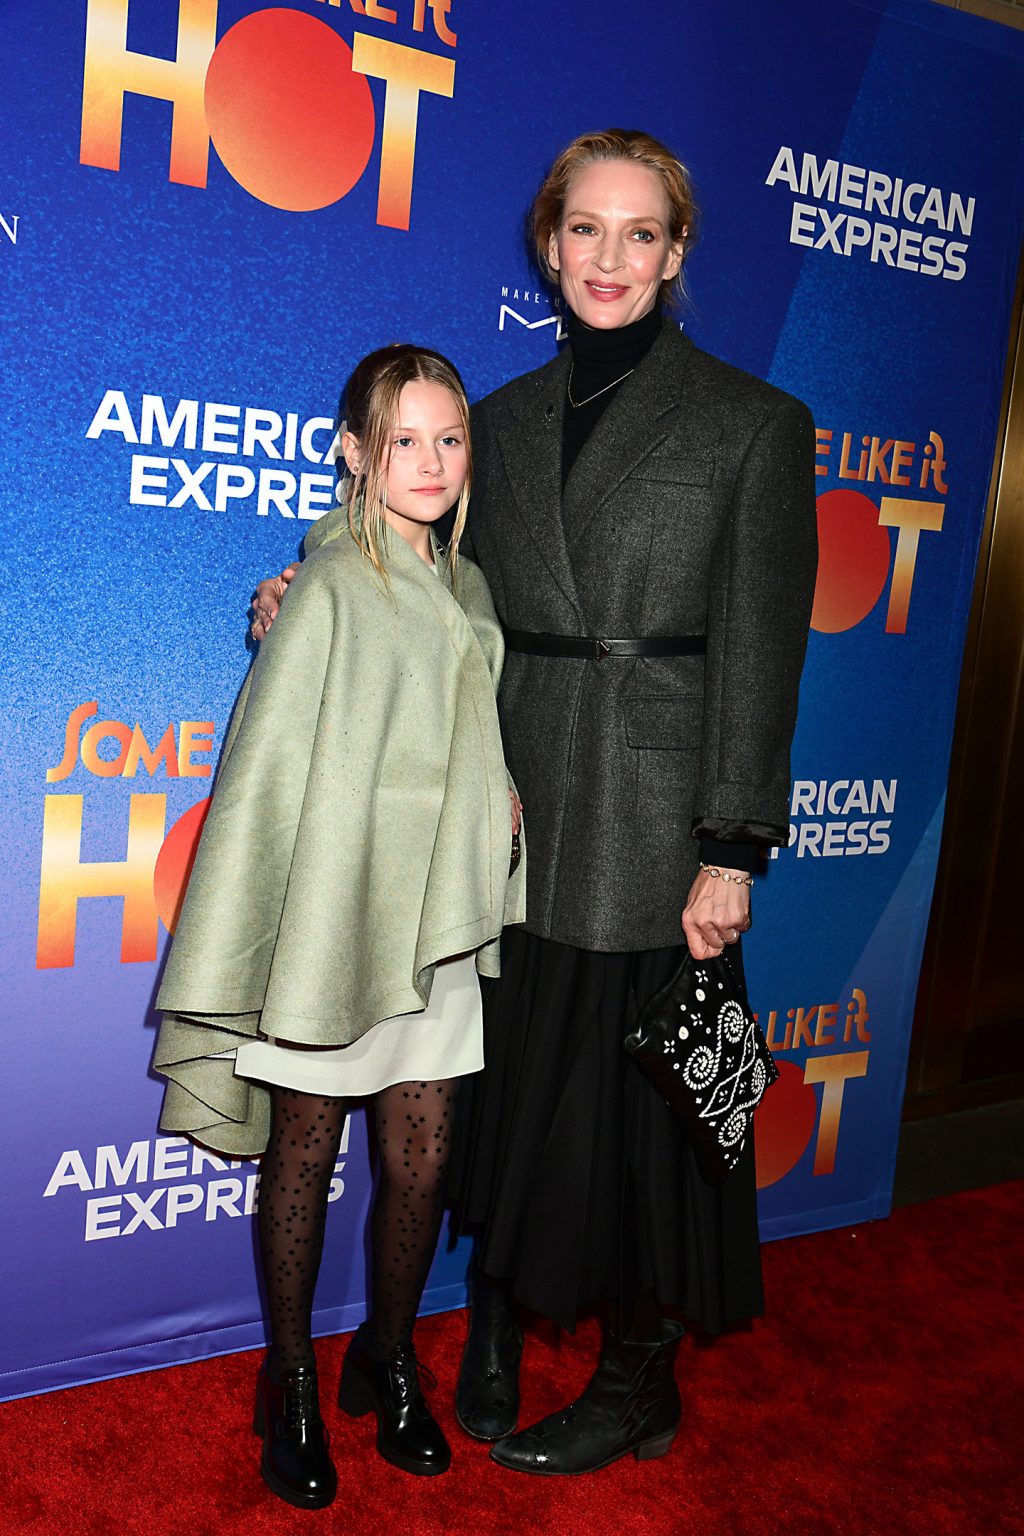 Uma Thurman Finally Showed Public Her 10-year-old Daughter: What the ...